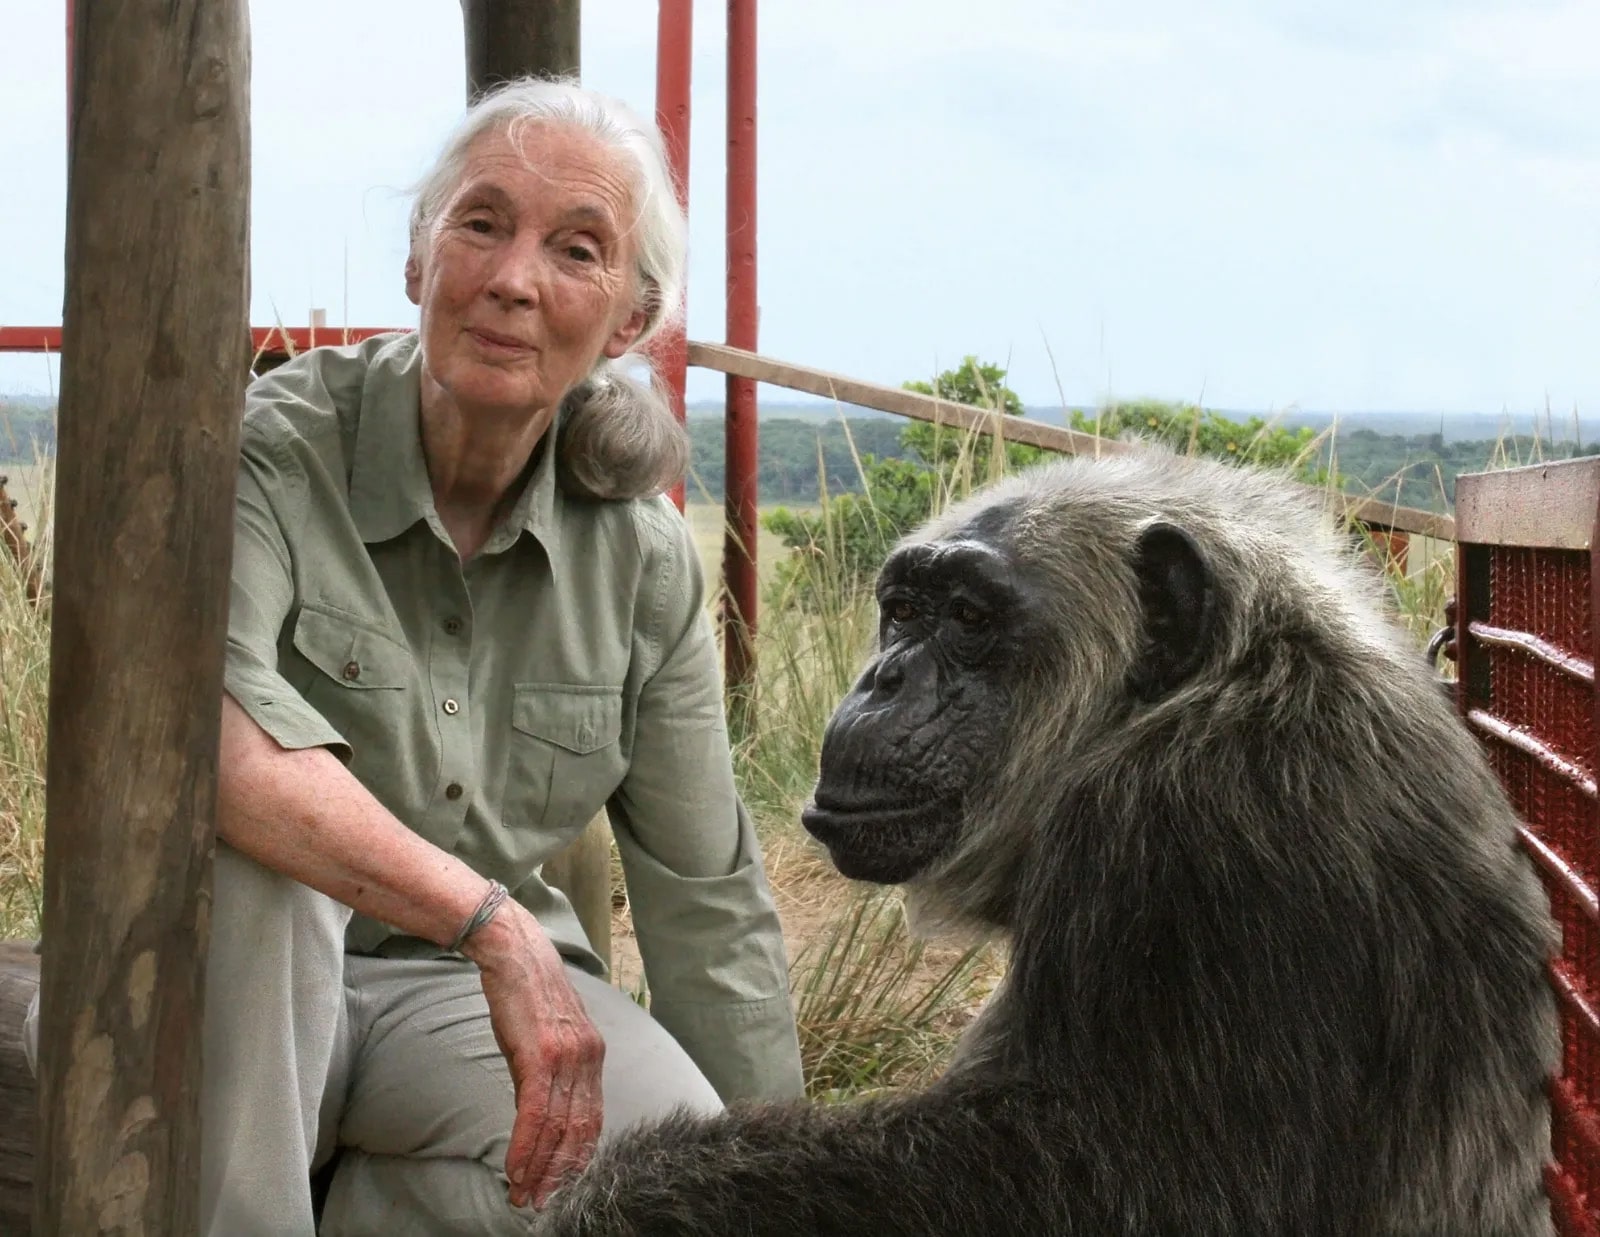 20 interesting facts about Jane Goodall